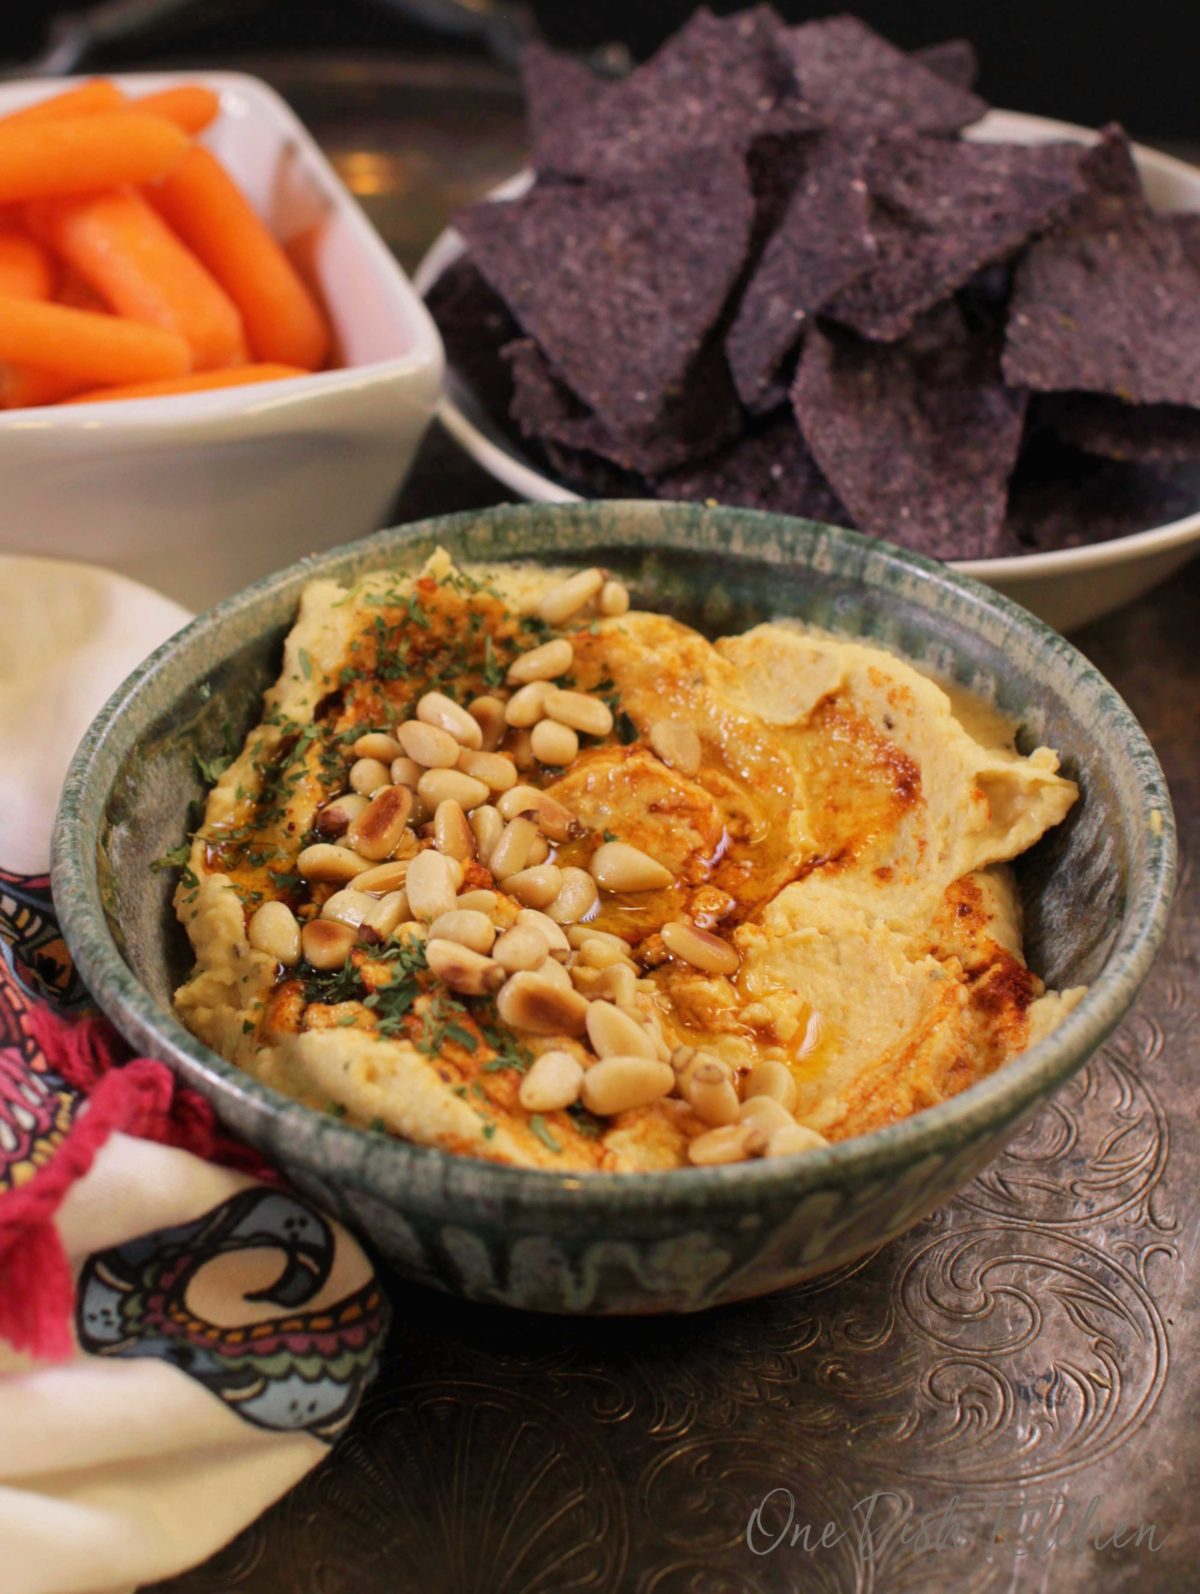 A bowl of hummus topped with toasted pine nuts, olive oil, and paprika next to a bowl of blue corn tortilla chips and a small bowl of baby carrots all on a metal tray